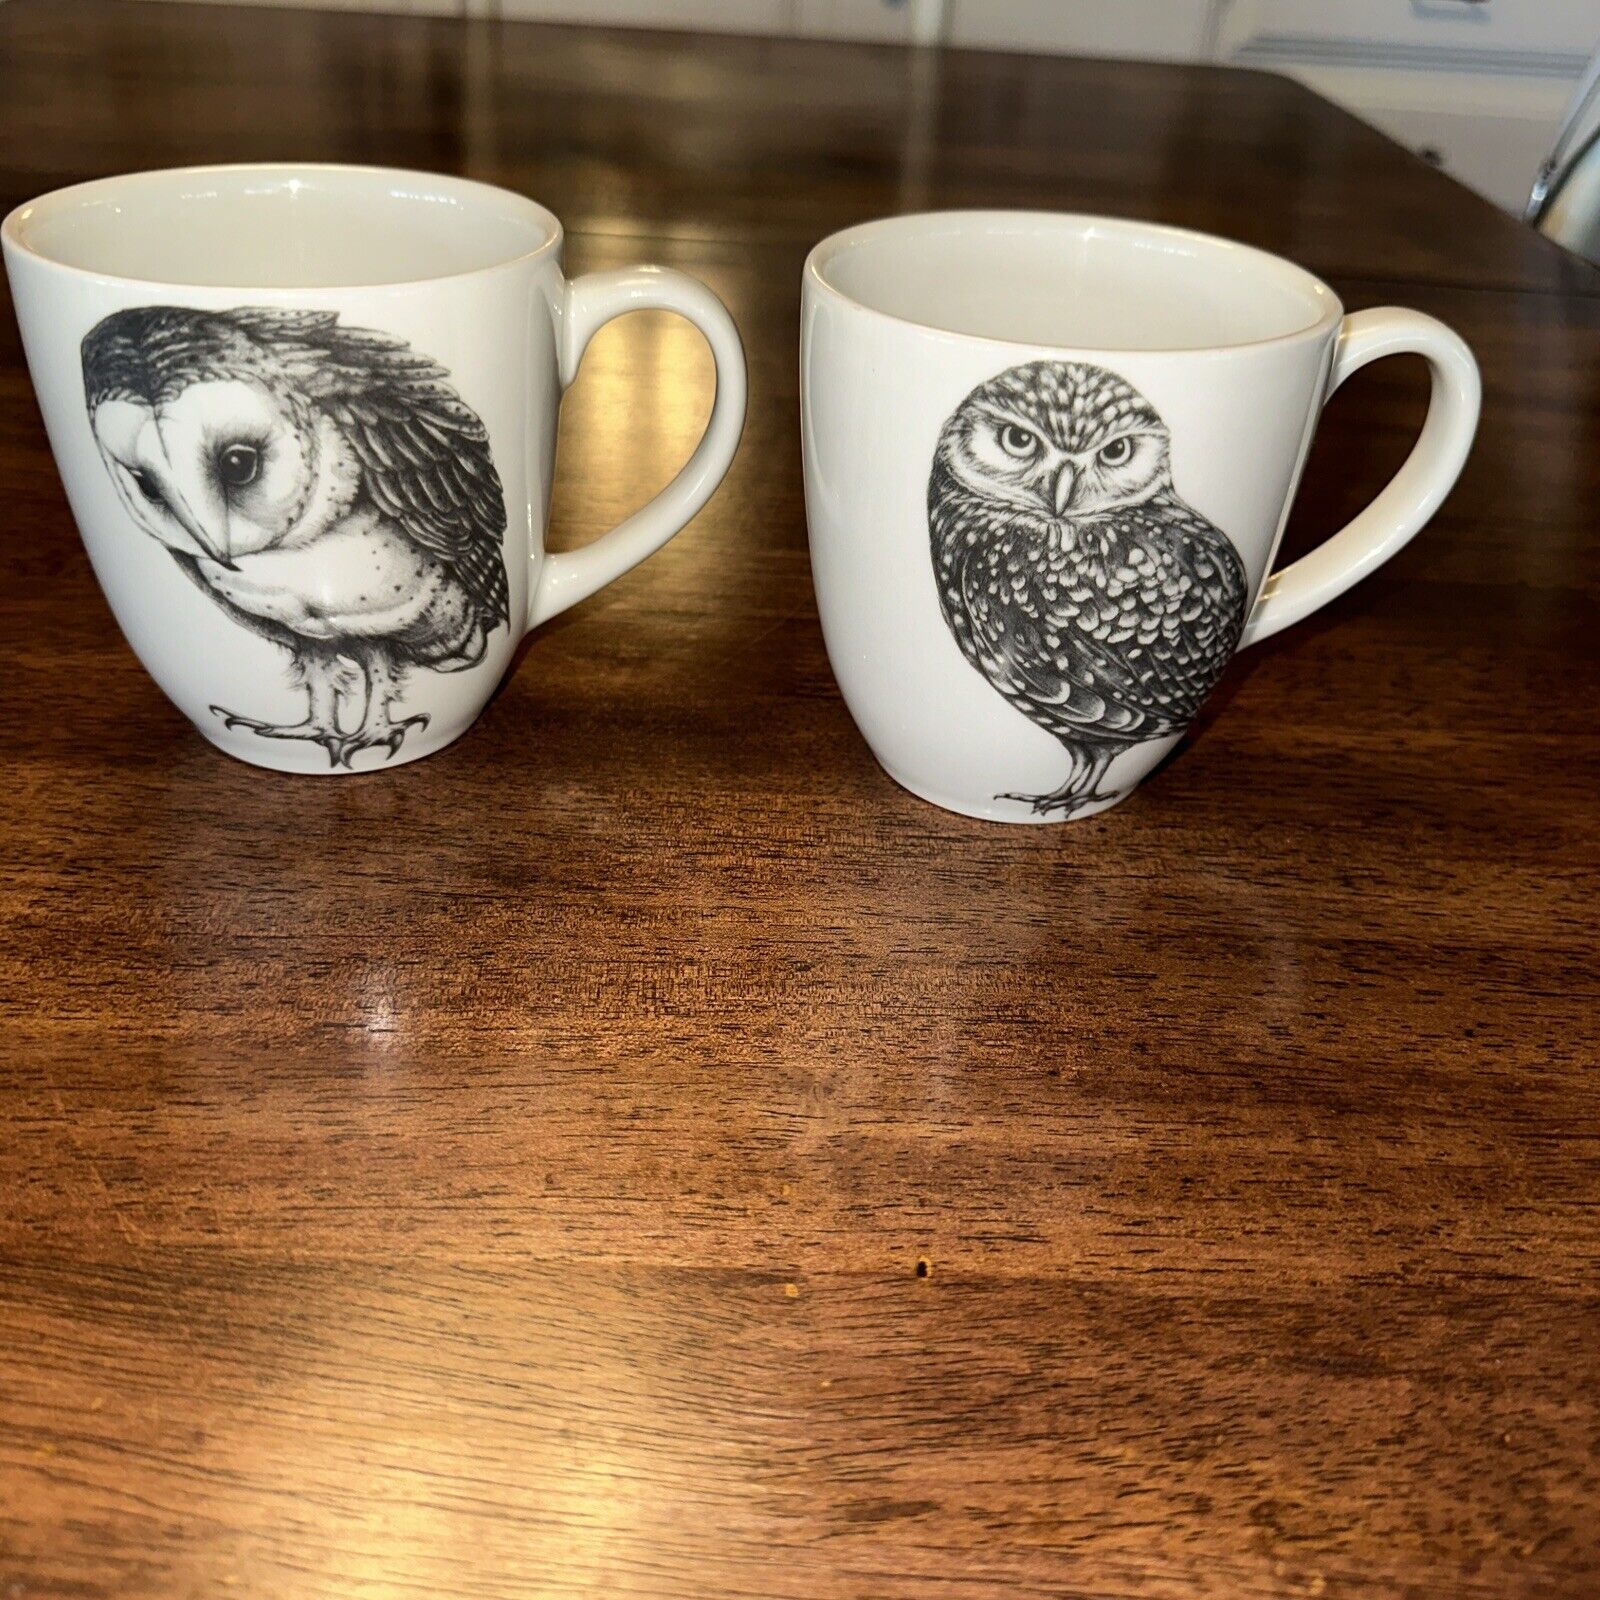 Laura Zinder Handmade Lot Of 2 Owl Mugs GUILFORD VERMONT Never Used 